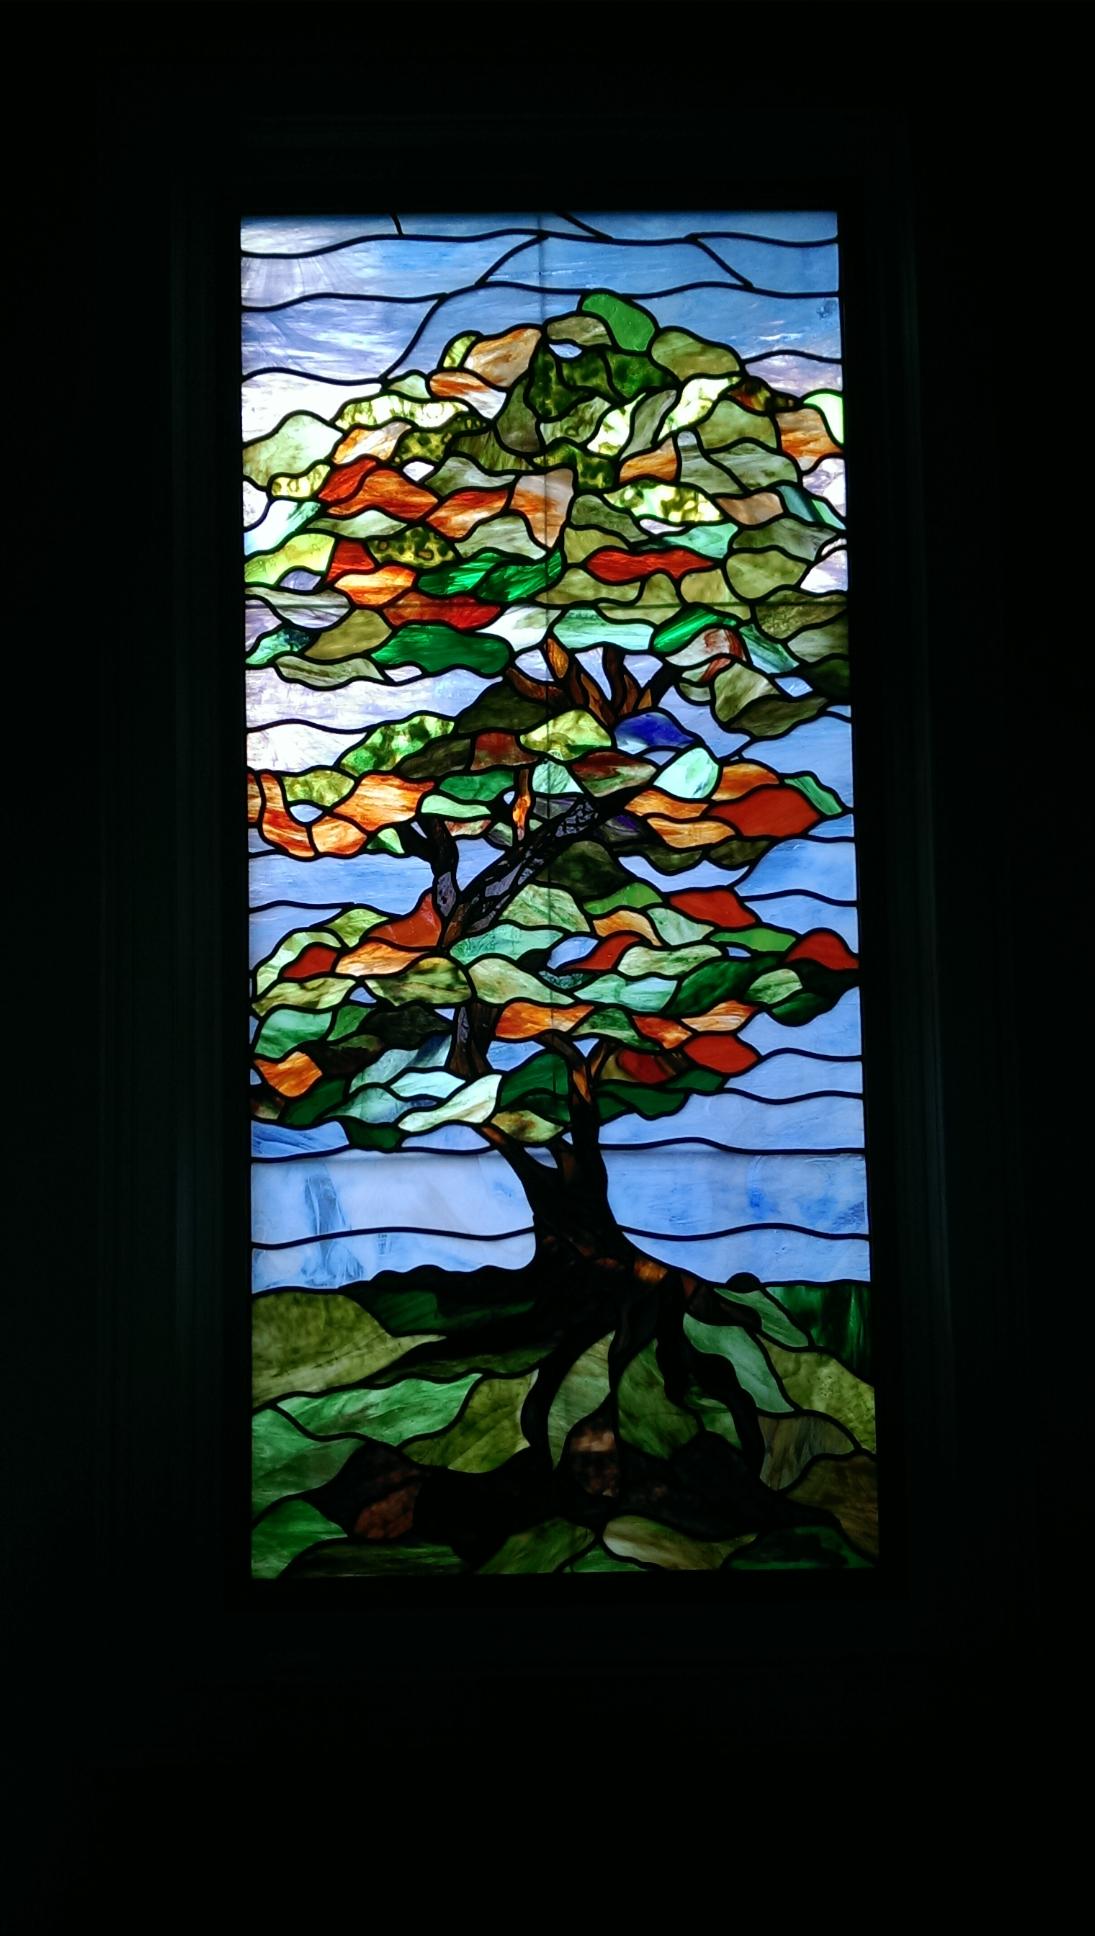 Lead Came [Class in Nashville] @ Sam Simms Stained Glass